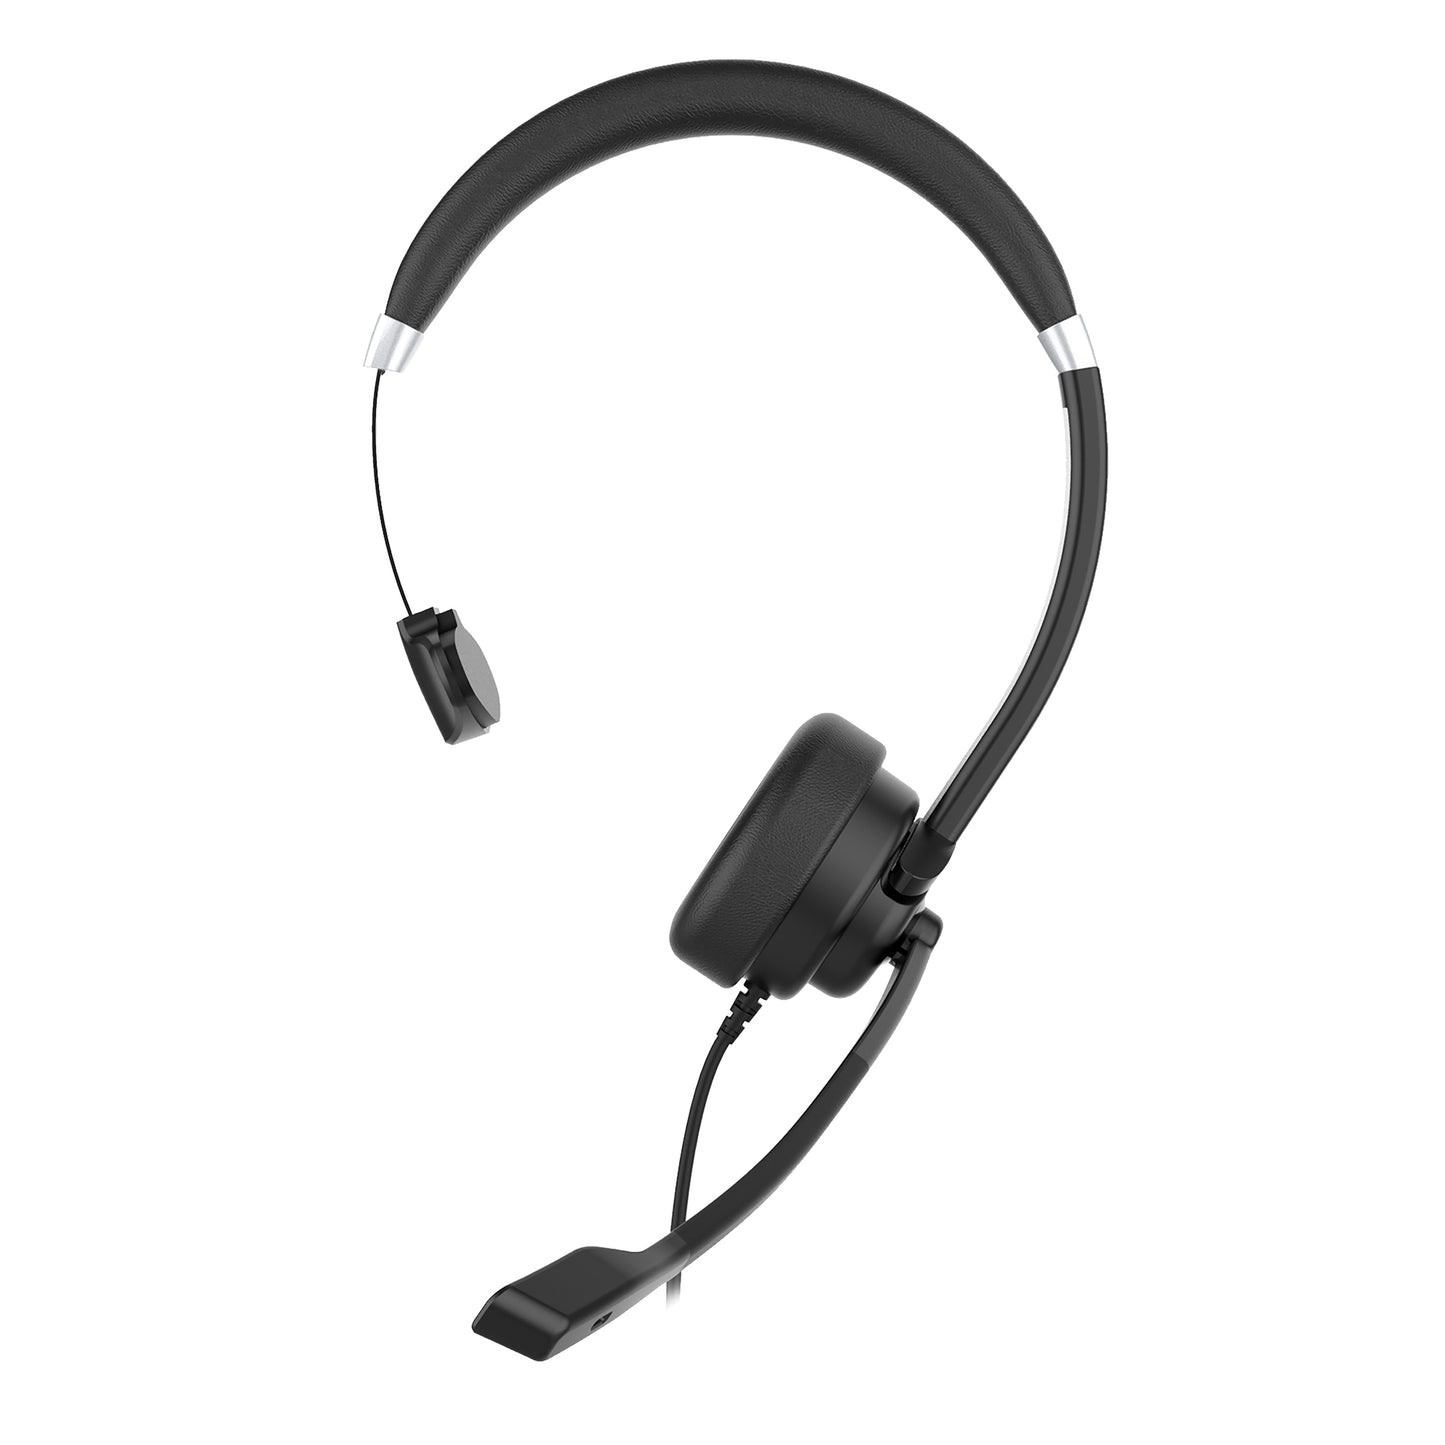 Front view of the Connect USB Mono Headset with Boom Microphone. Inset photo shows USB A Connector to connect to a PC/Mac, Tablet, Phone or computer.